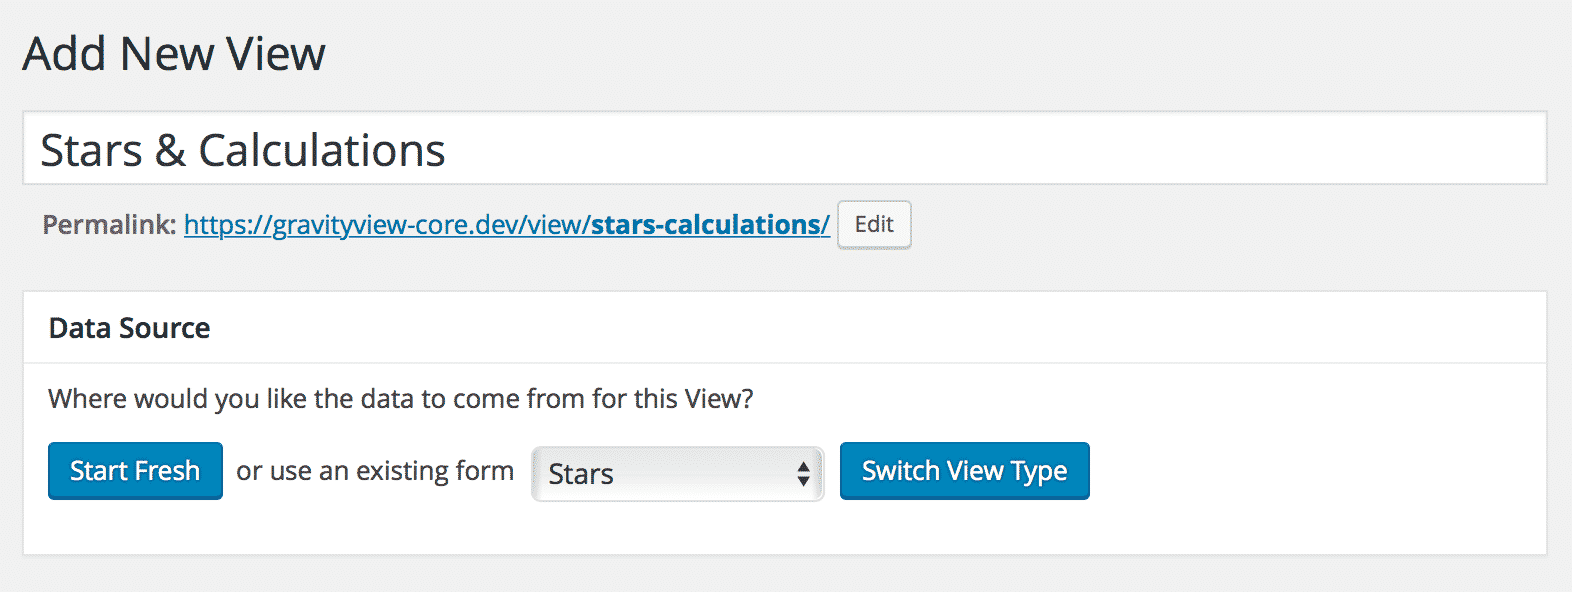 Adding a new View in GravityView